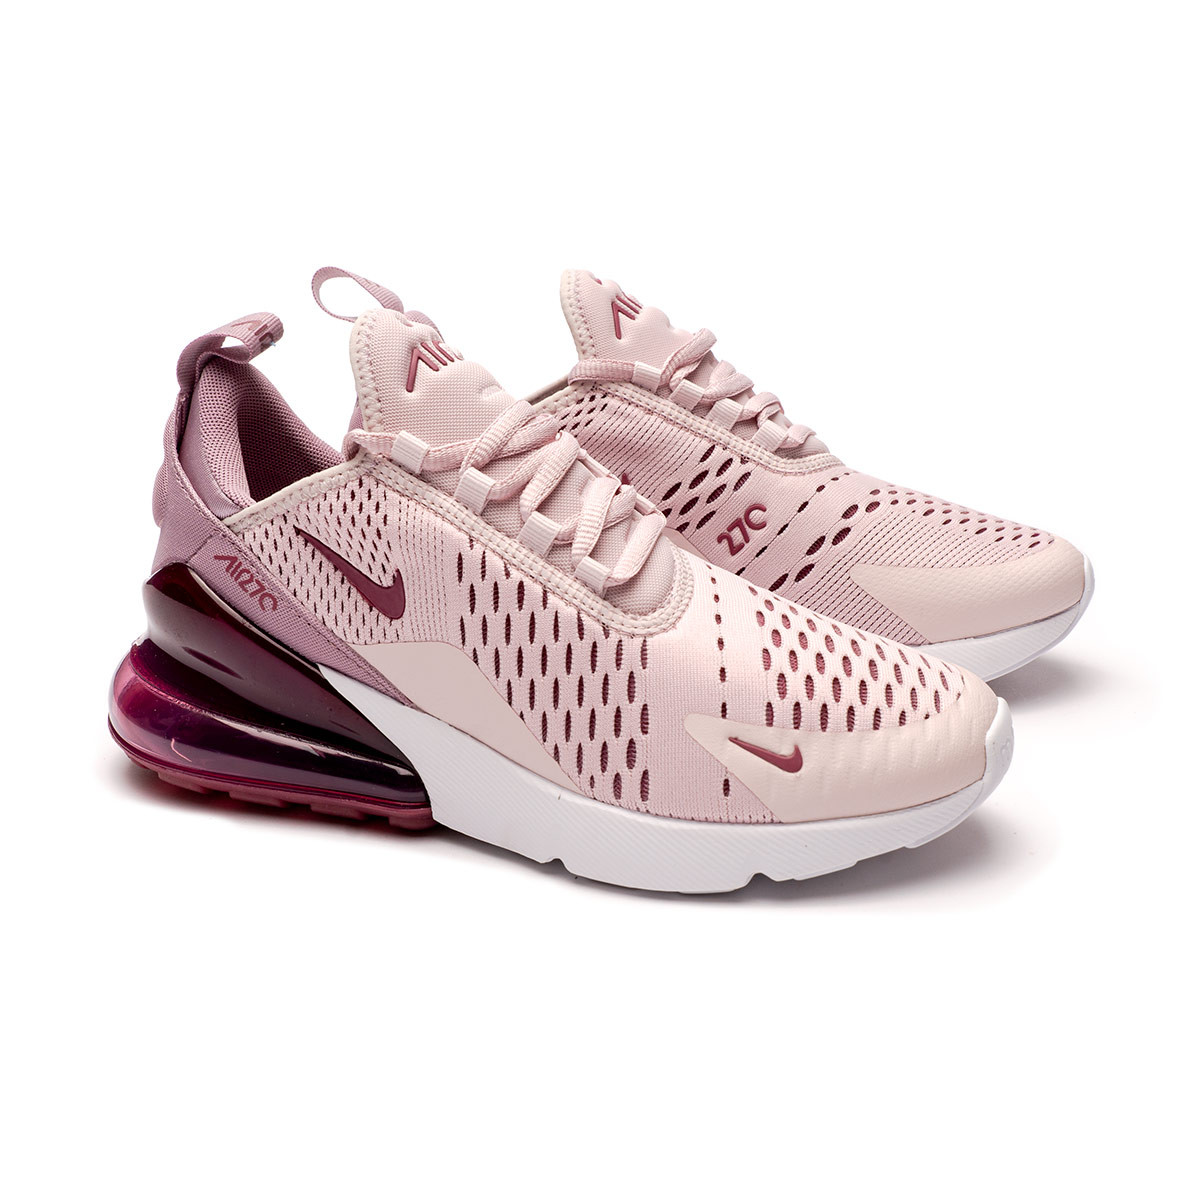 Zapatilla Nike Air Max 270 Mujer Barely Rose-Vintage Wine ... شابتر